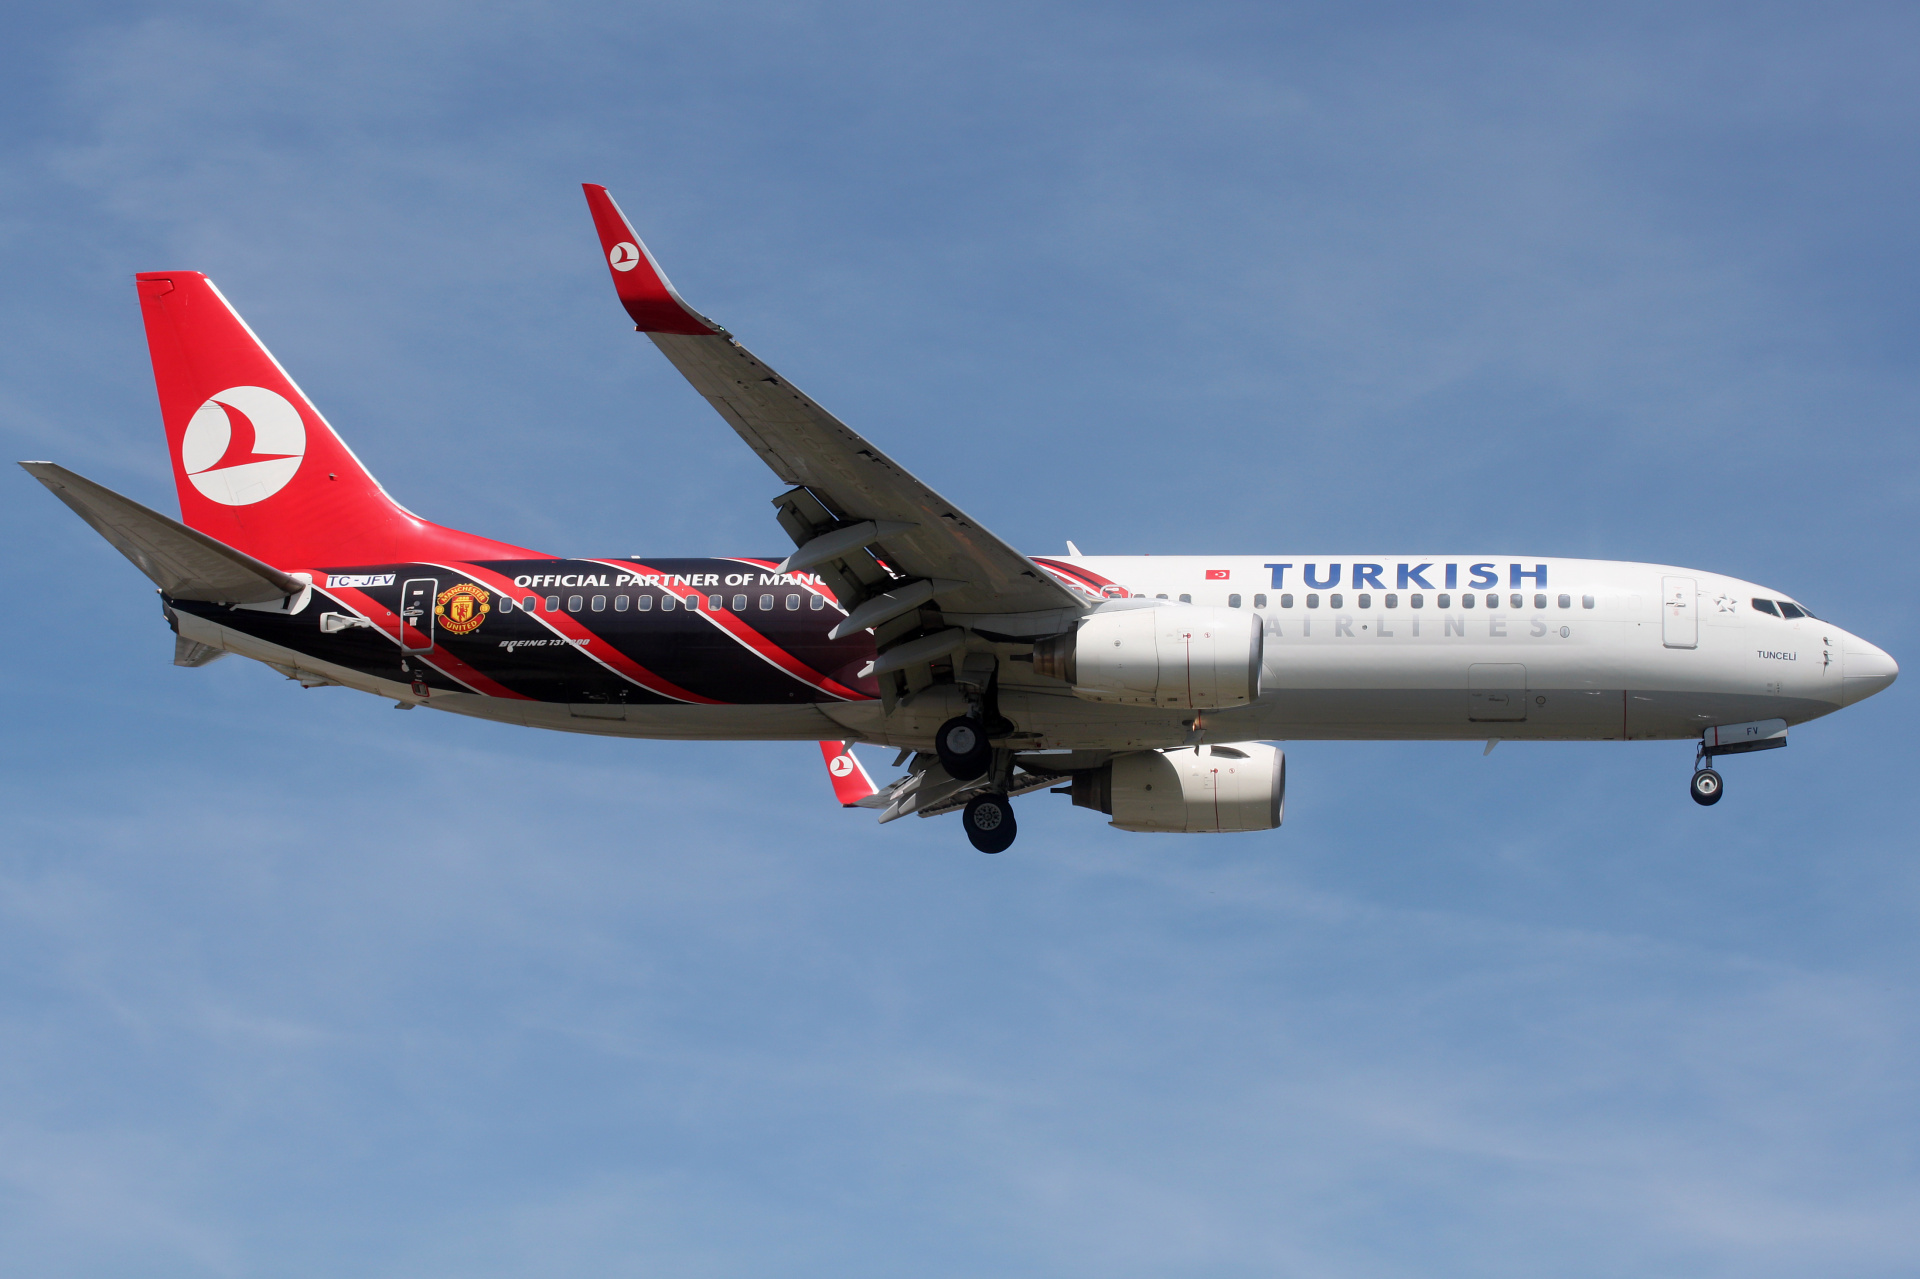 TC-JFV (Manchester United livery) (Aircraft » EPWA Spotting » Boeing 737-800 » THY Turkish Airlines)